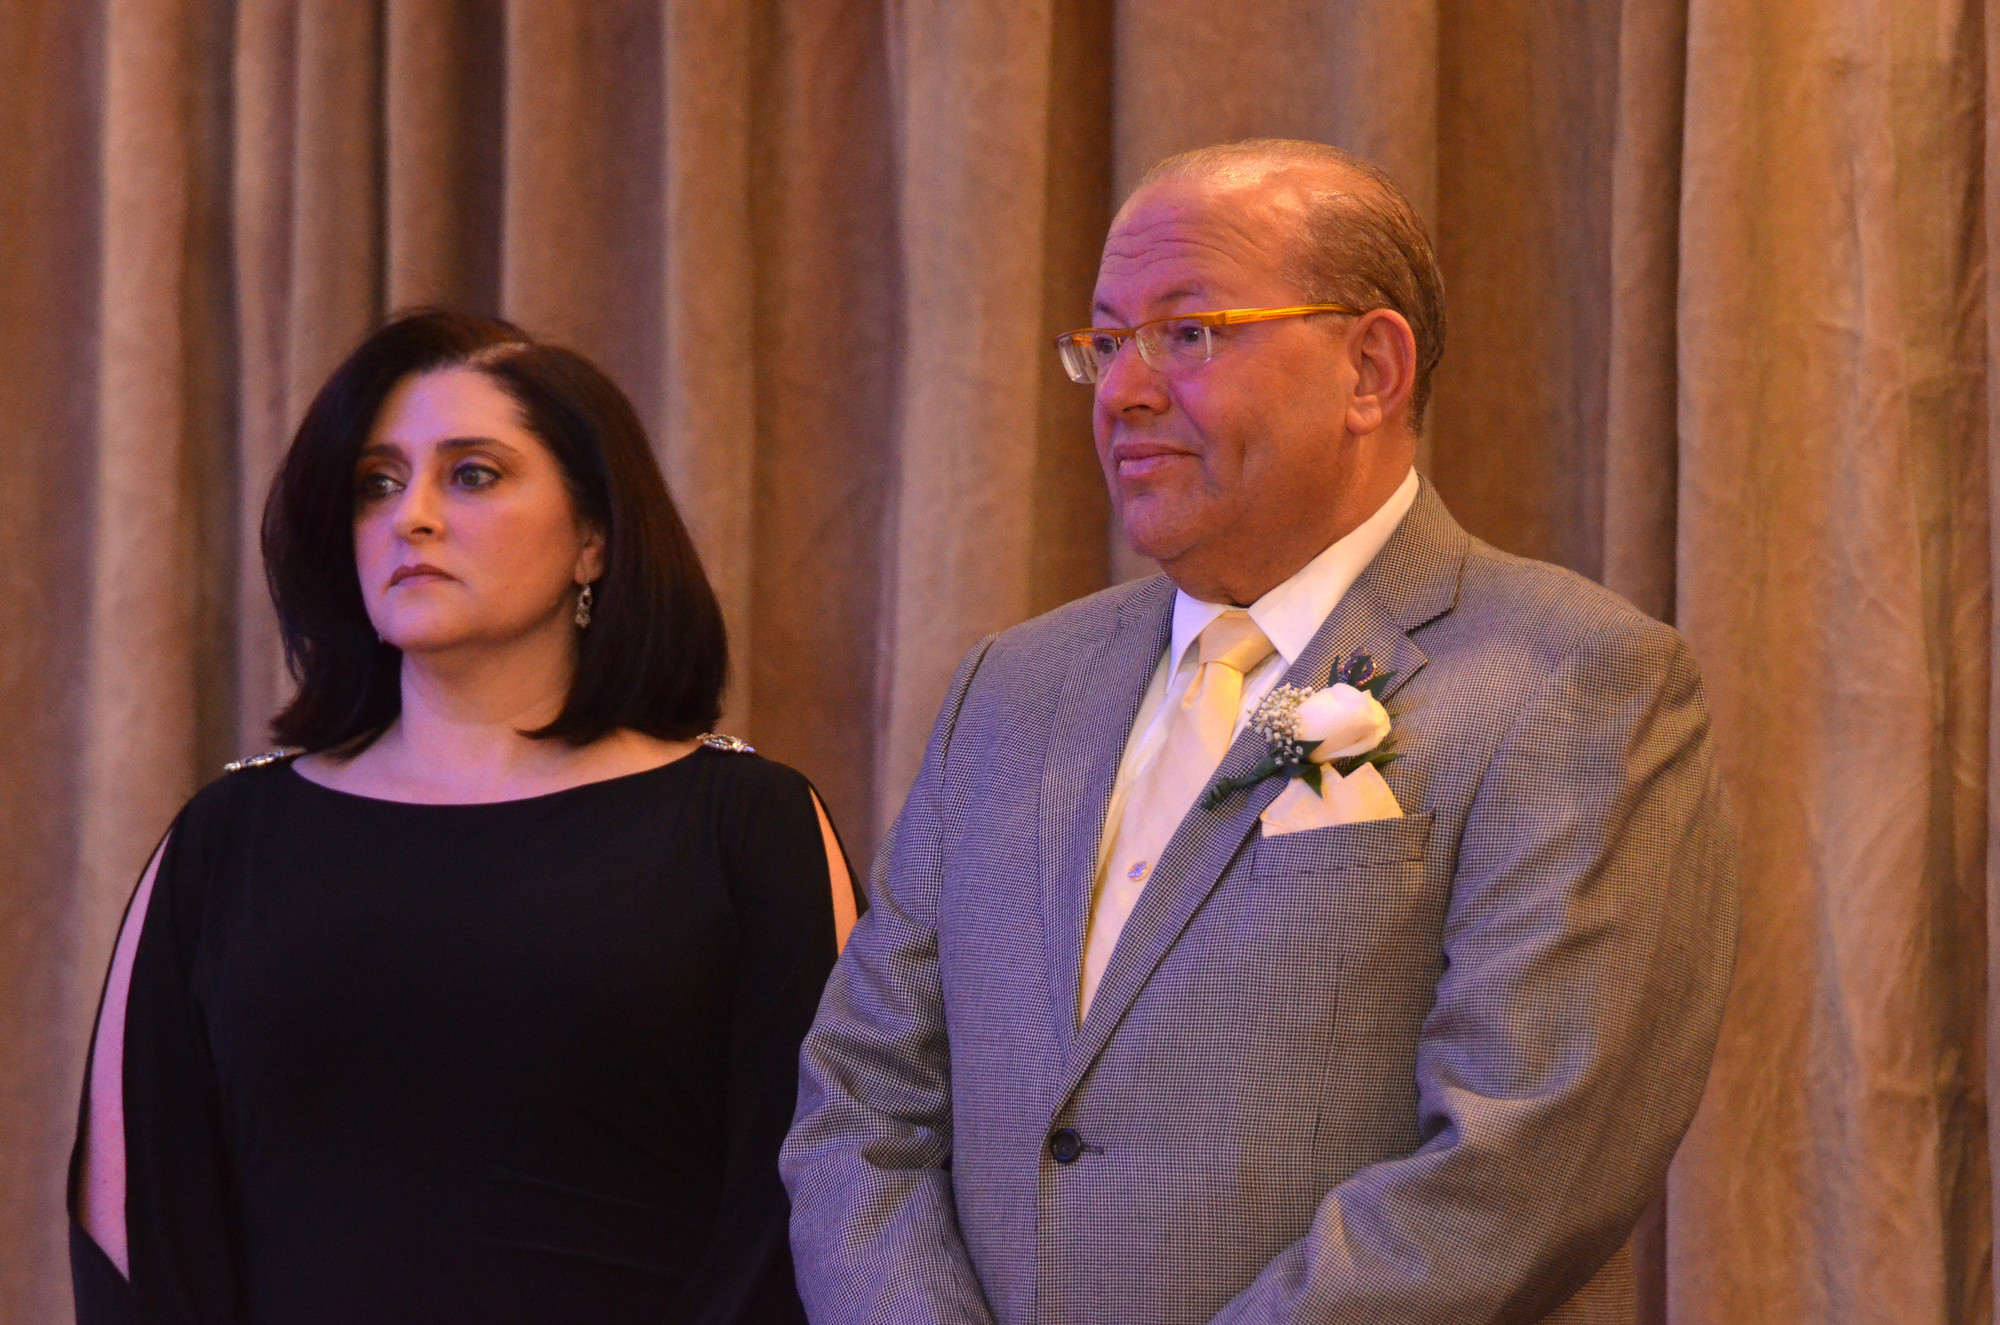 Immediate past PTA Council President Roxanne Rose and Town of Hempstead Councilman Gary Hudes were the night's major honorees.